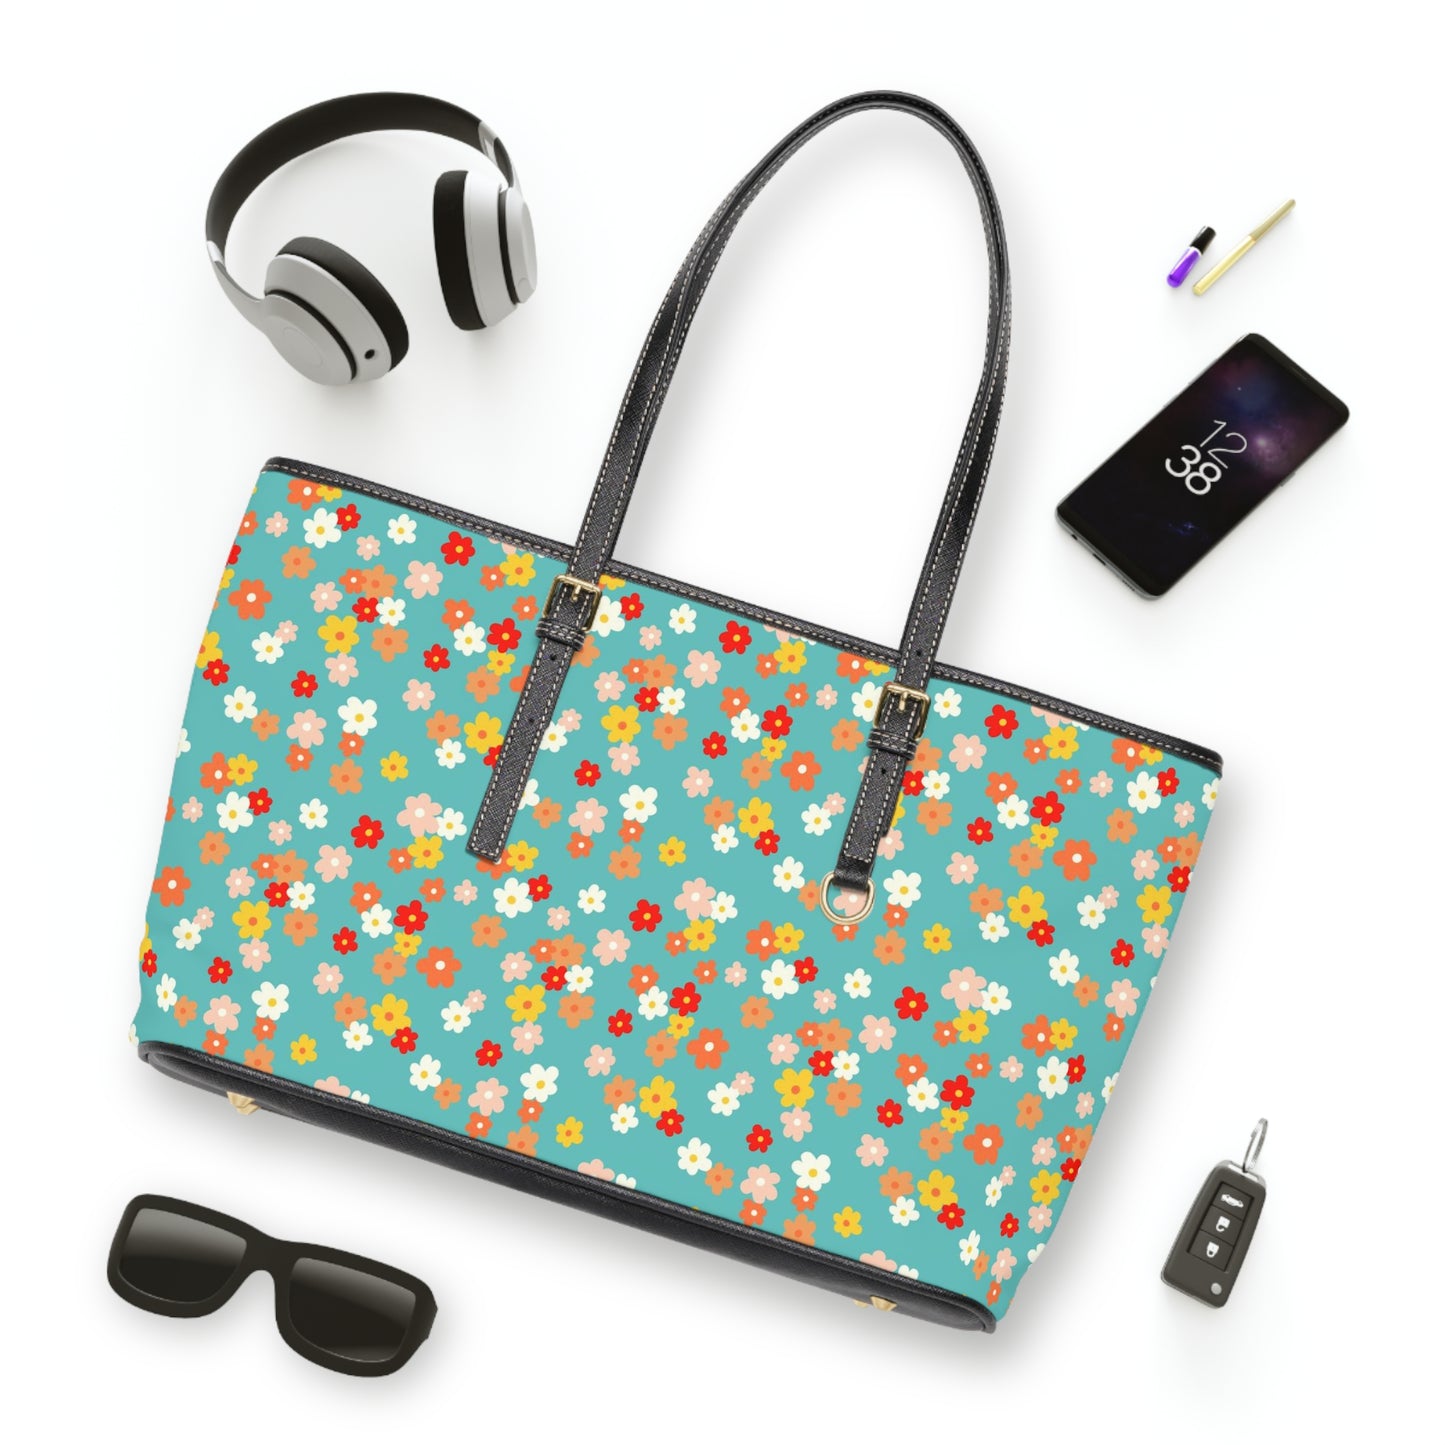 Ditzy Daisies PU Leather Shoulder Bag